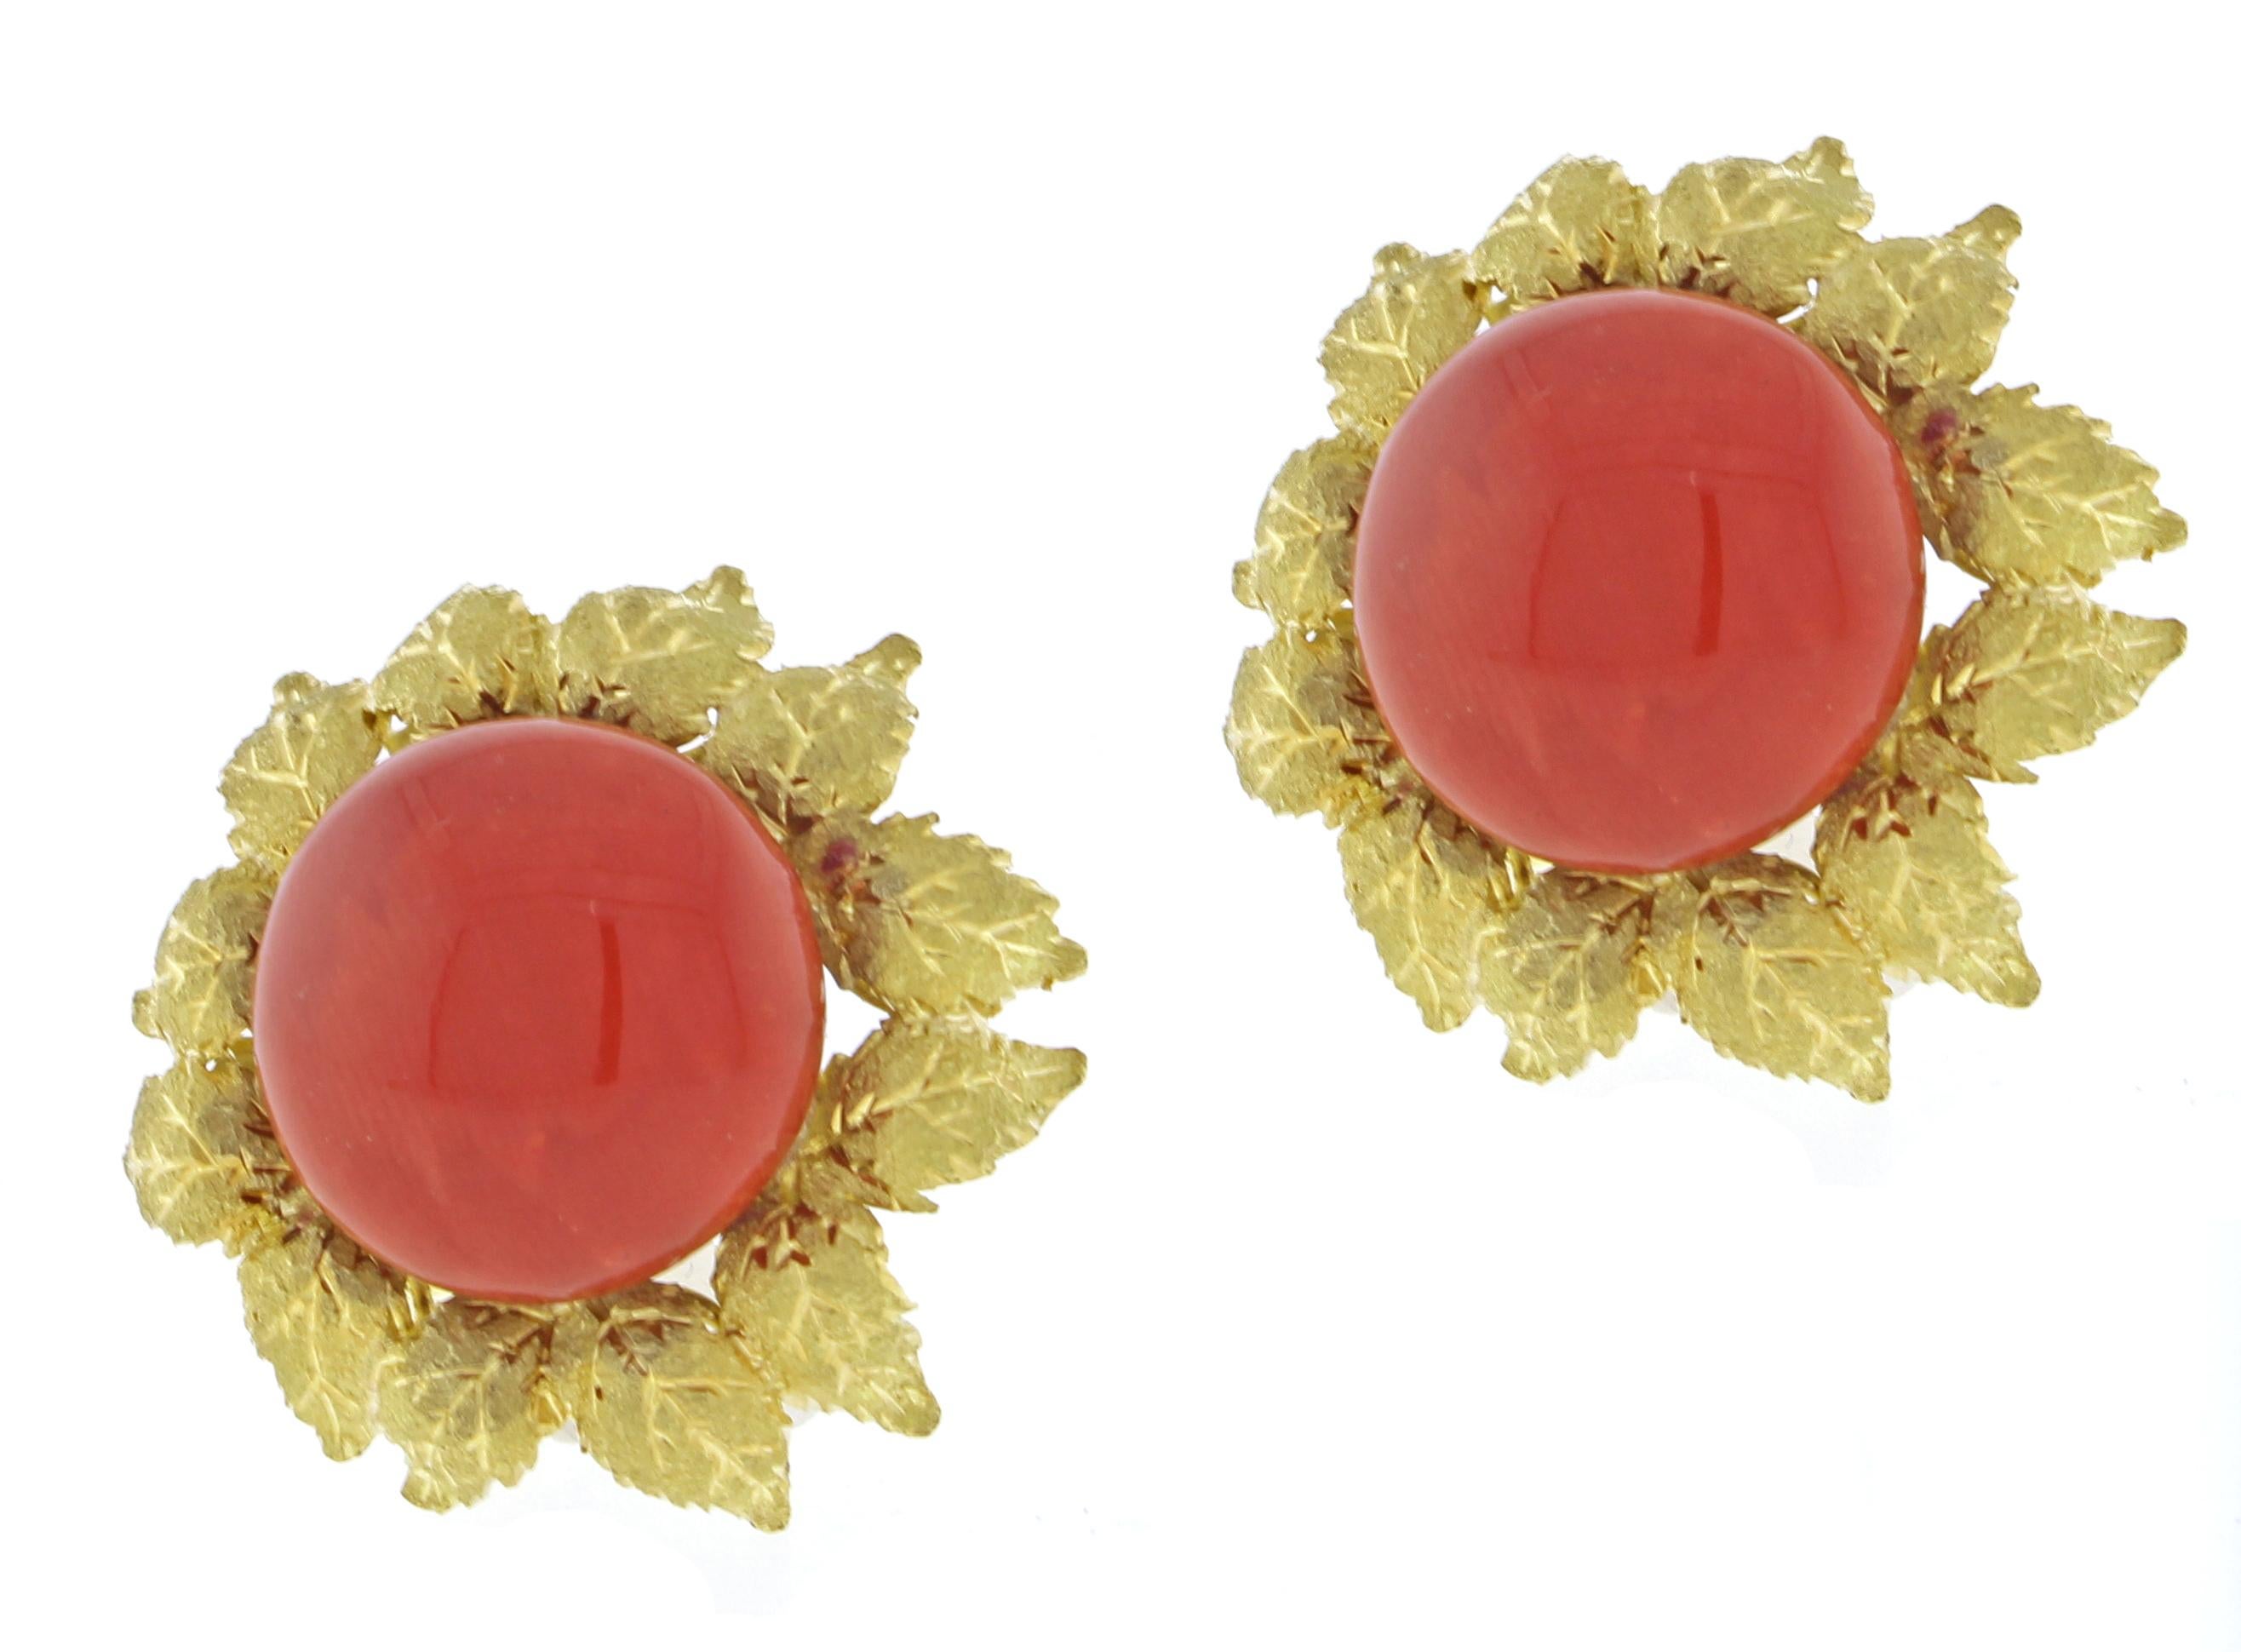 From Italian jewelry designer Buccellati, a pair of ox-blood coral Oak leaf earrings.
♦ Designer: Buccellati   
♦ Metal: 18 karat
♦ Gem stone: Cabochon  ox-blood coral 14mm
♦ Circa 1990
 ♦ Dimensions: 25 X 22mm
♦ Condition: Excellent , pre-owned
 
